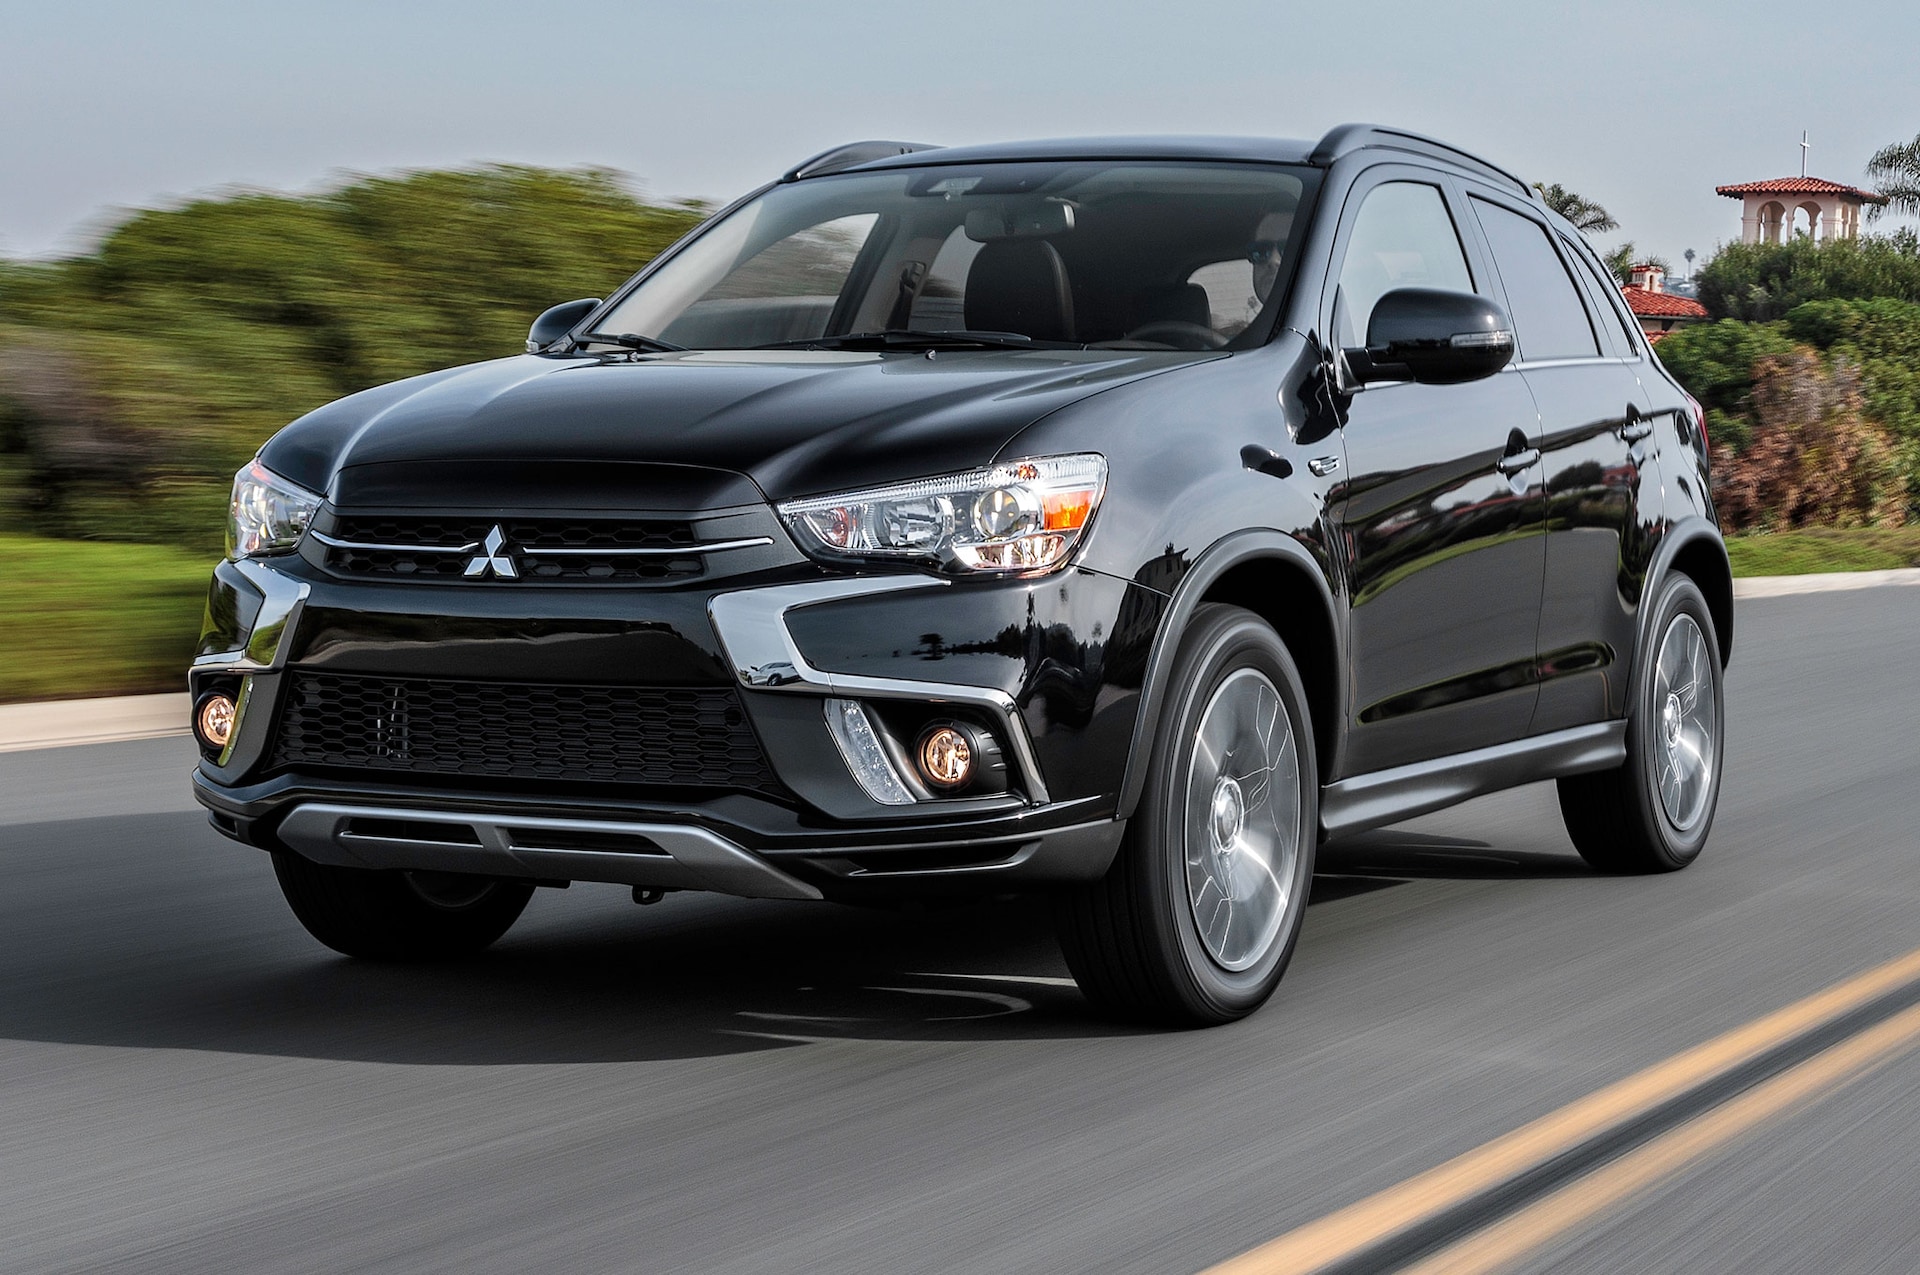 2018 Mitsubishi Outlander Sport SEL First Test: Refreshed but Lacking